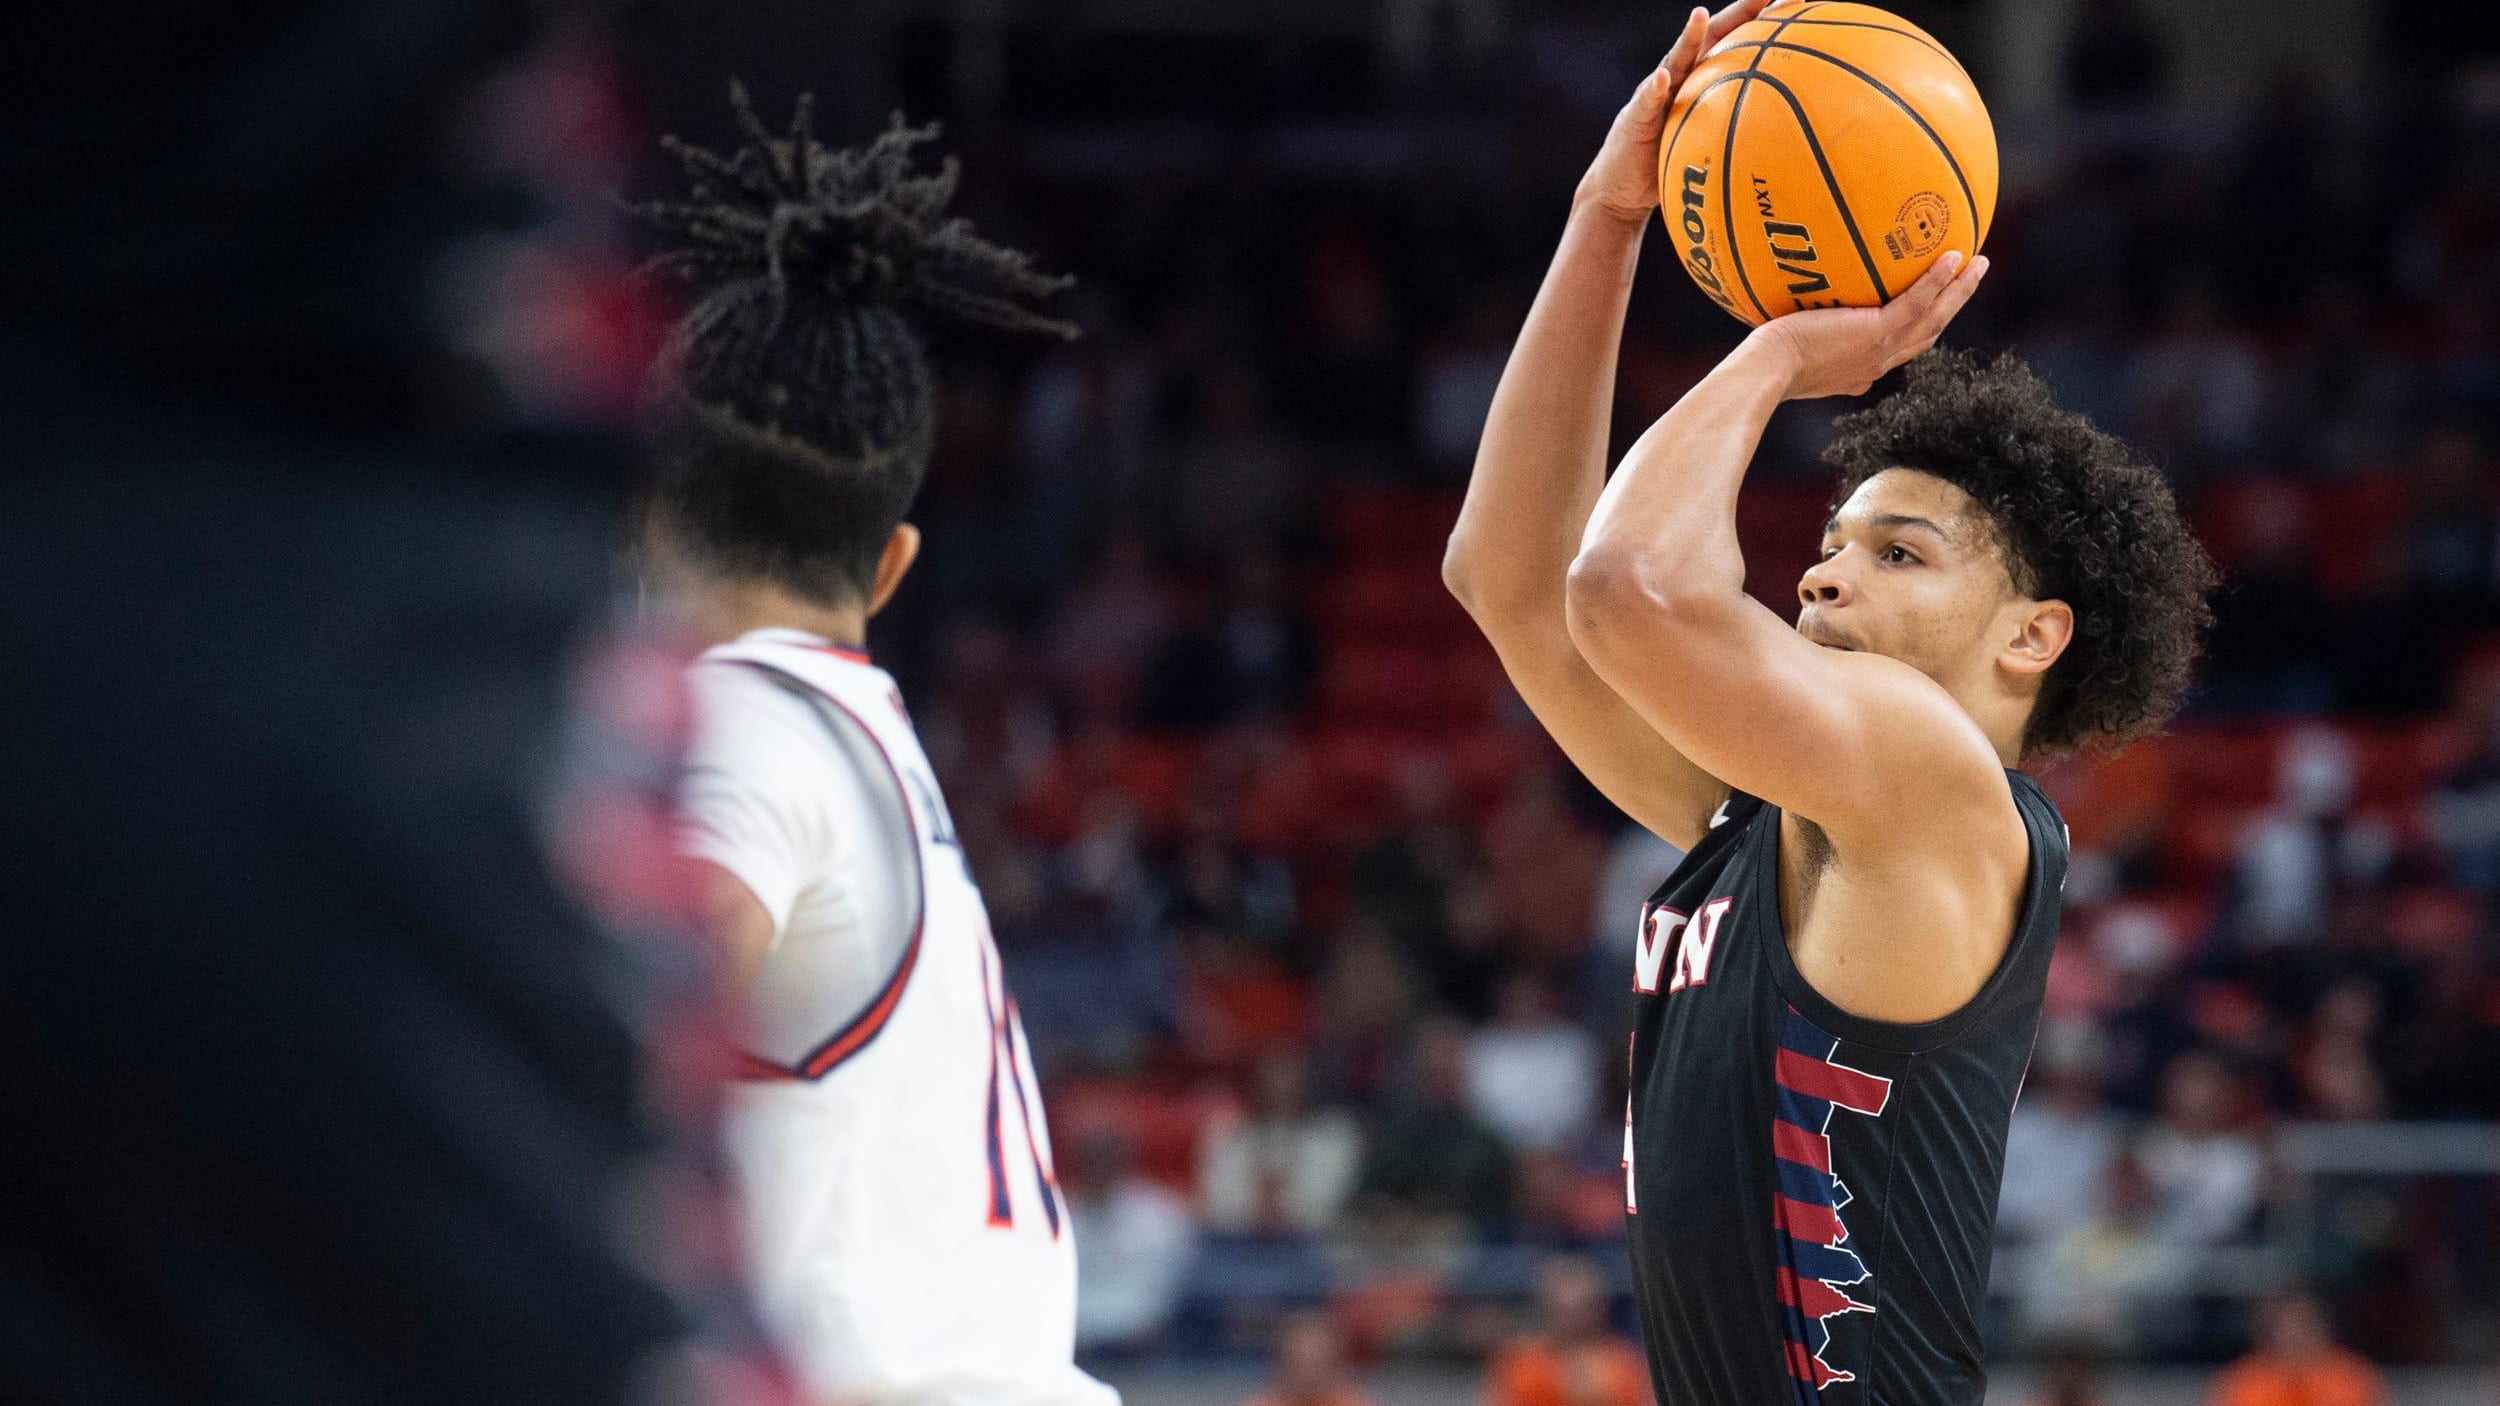 College Basketball: Four Under-the-Radar Perfect Transfer Fits